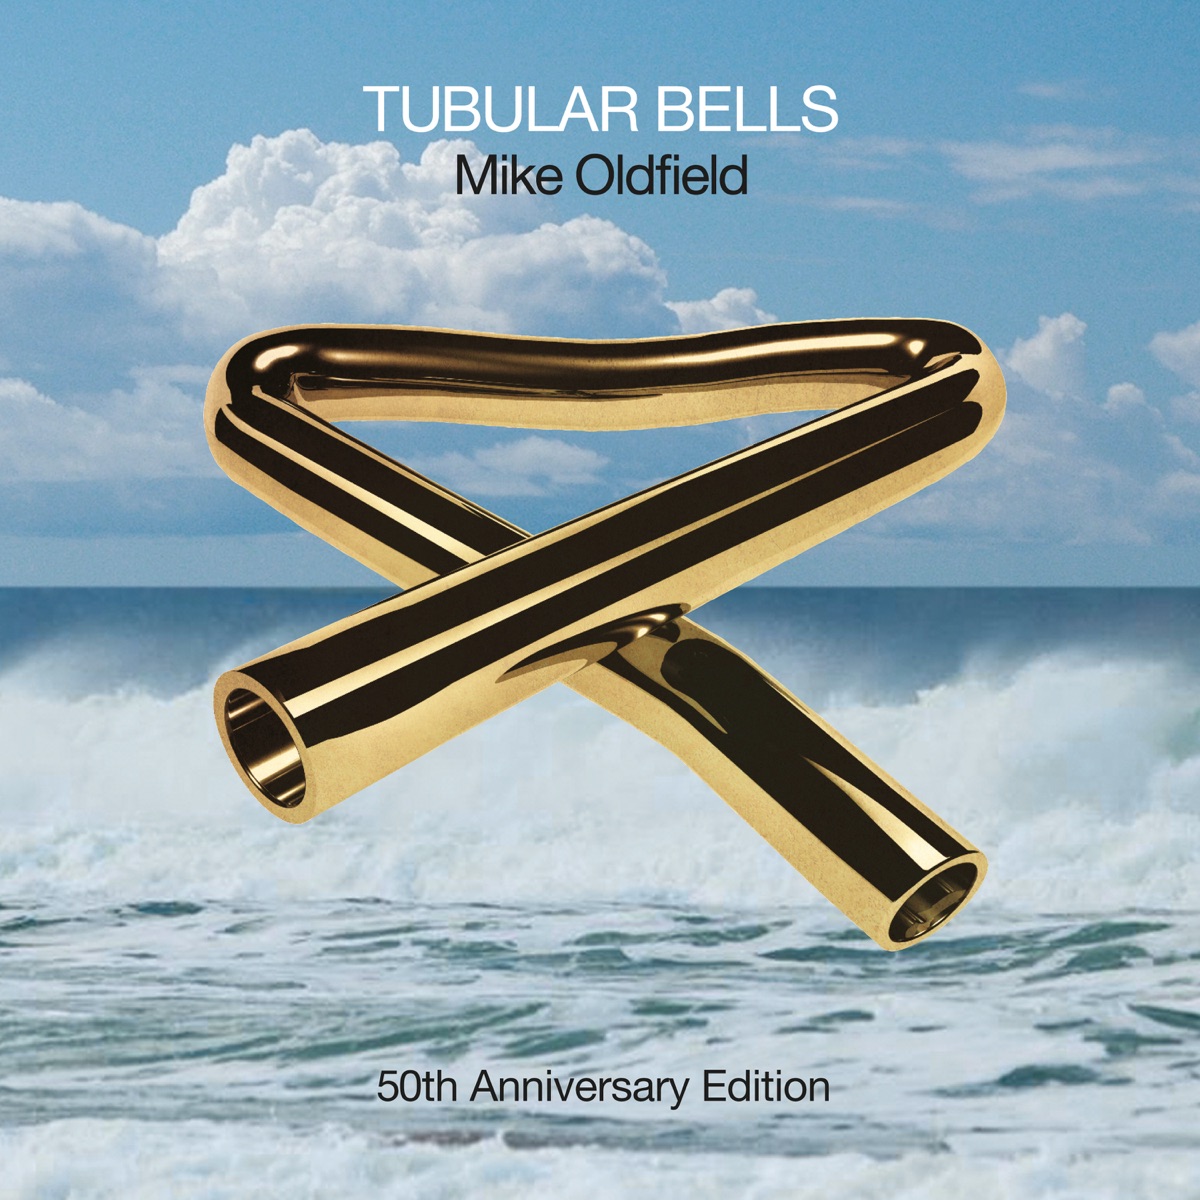 Tubular Bells (50th Anniversary) - Album by Mike Oldfield - Apple Music